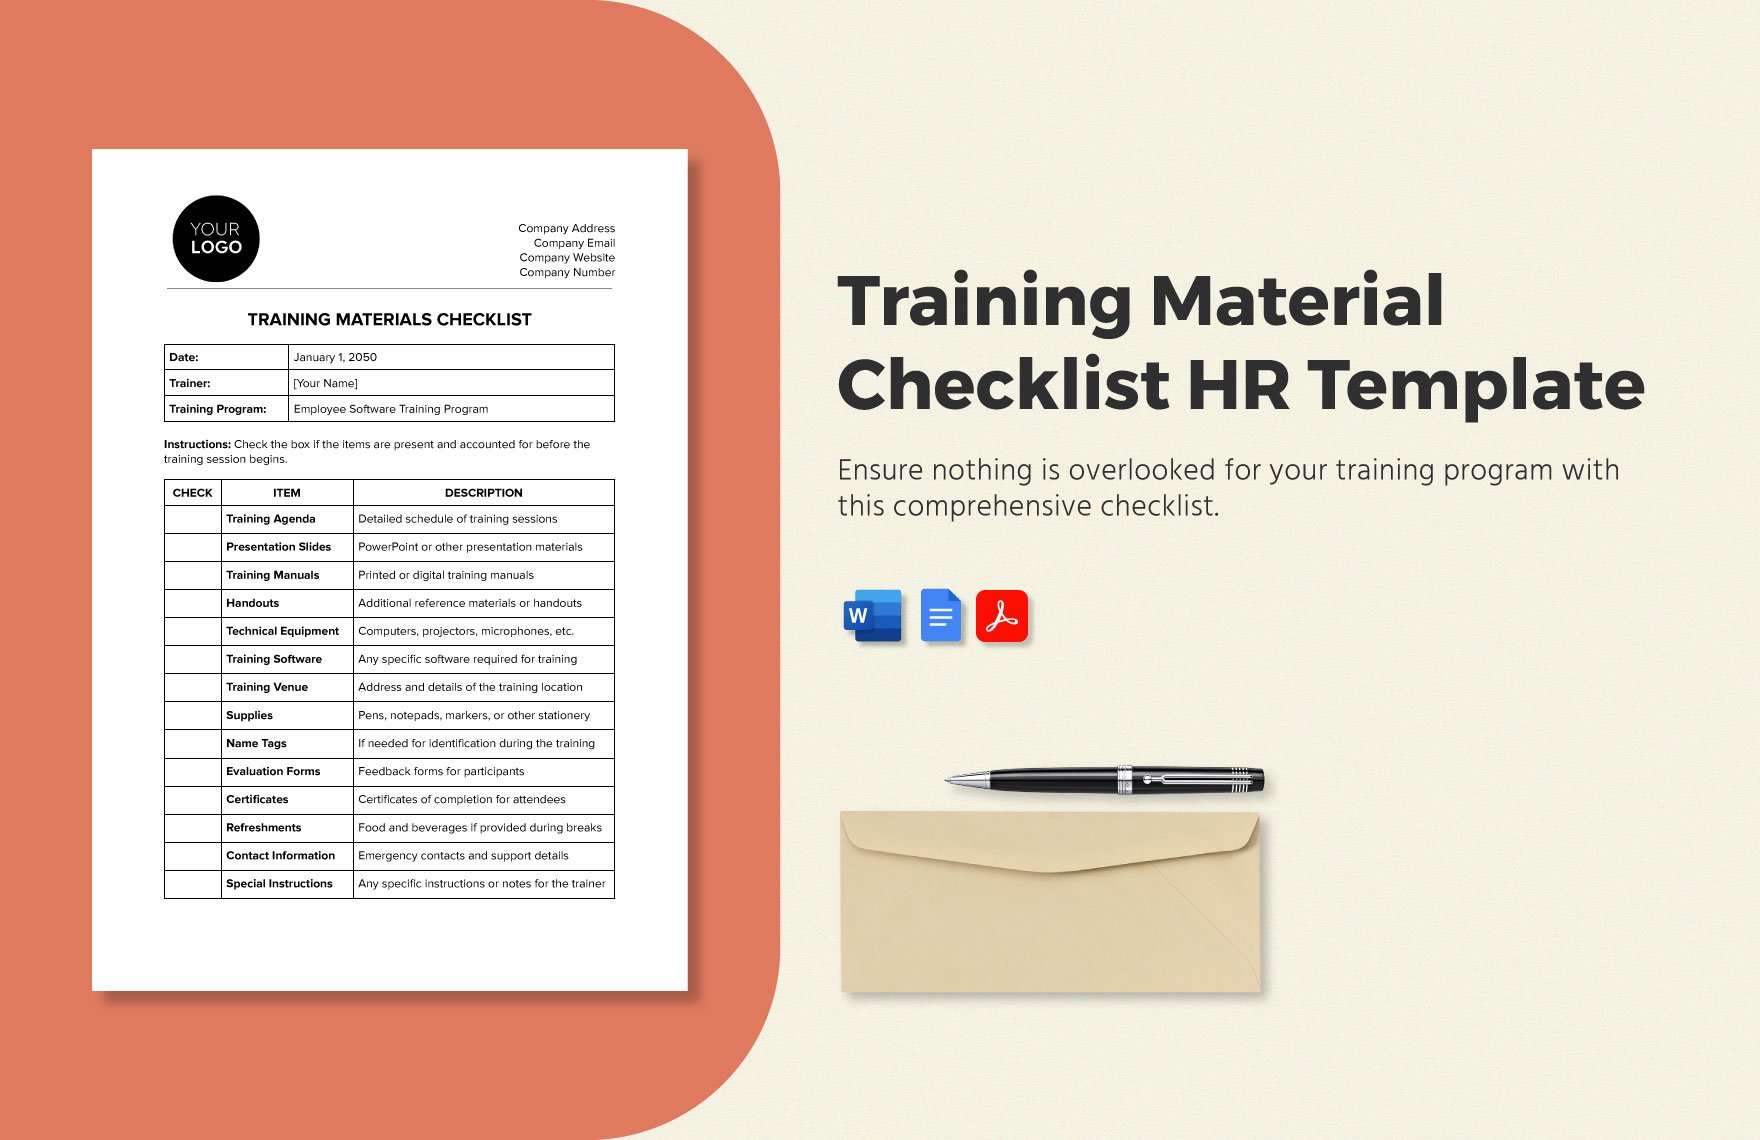 Training Material Checklist HR Template in Word, Google Docs, PDF